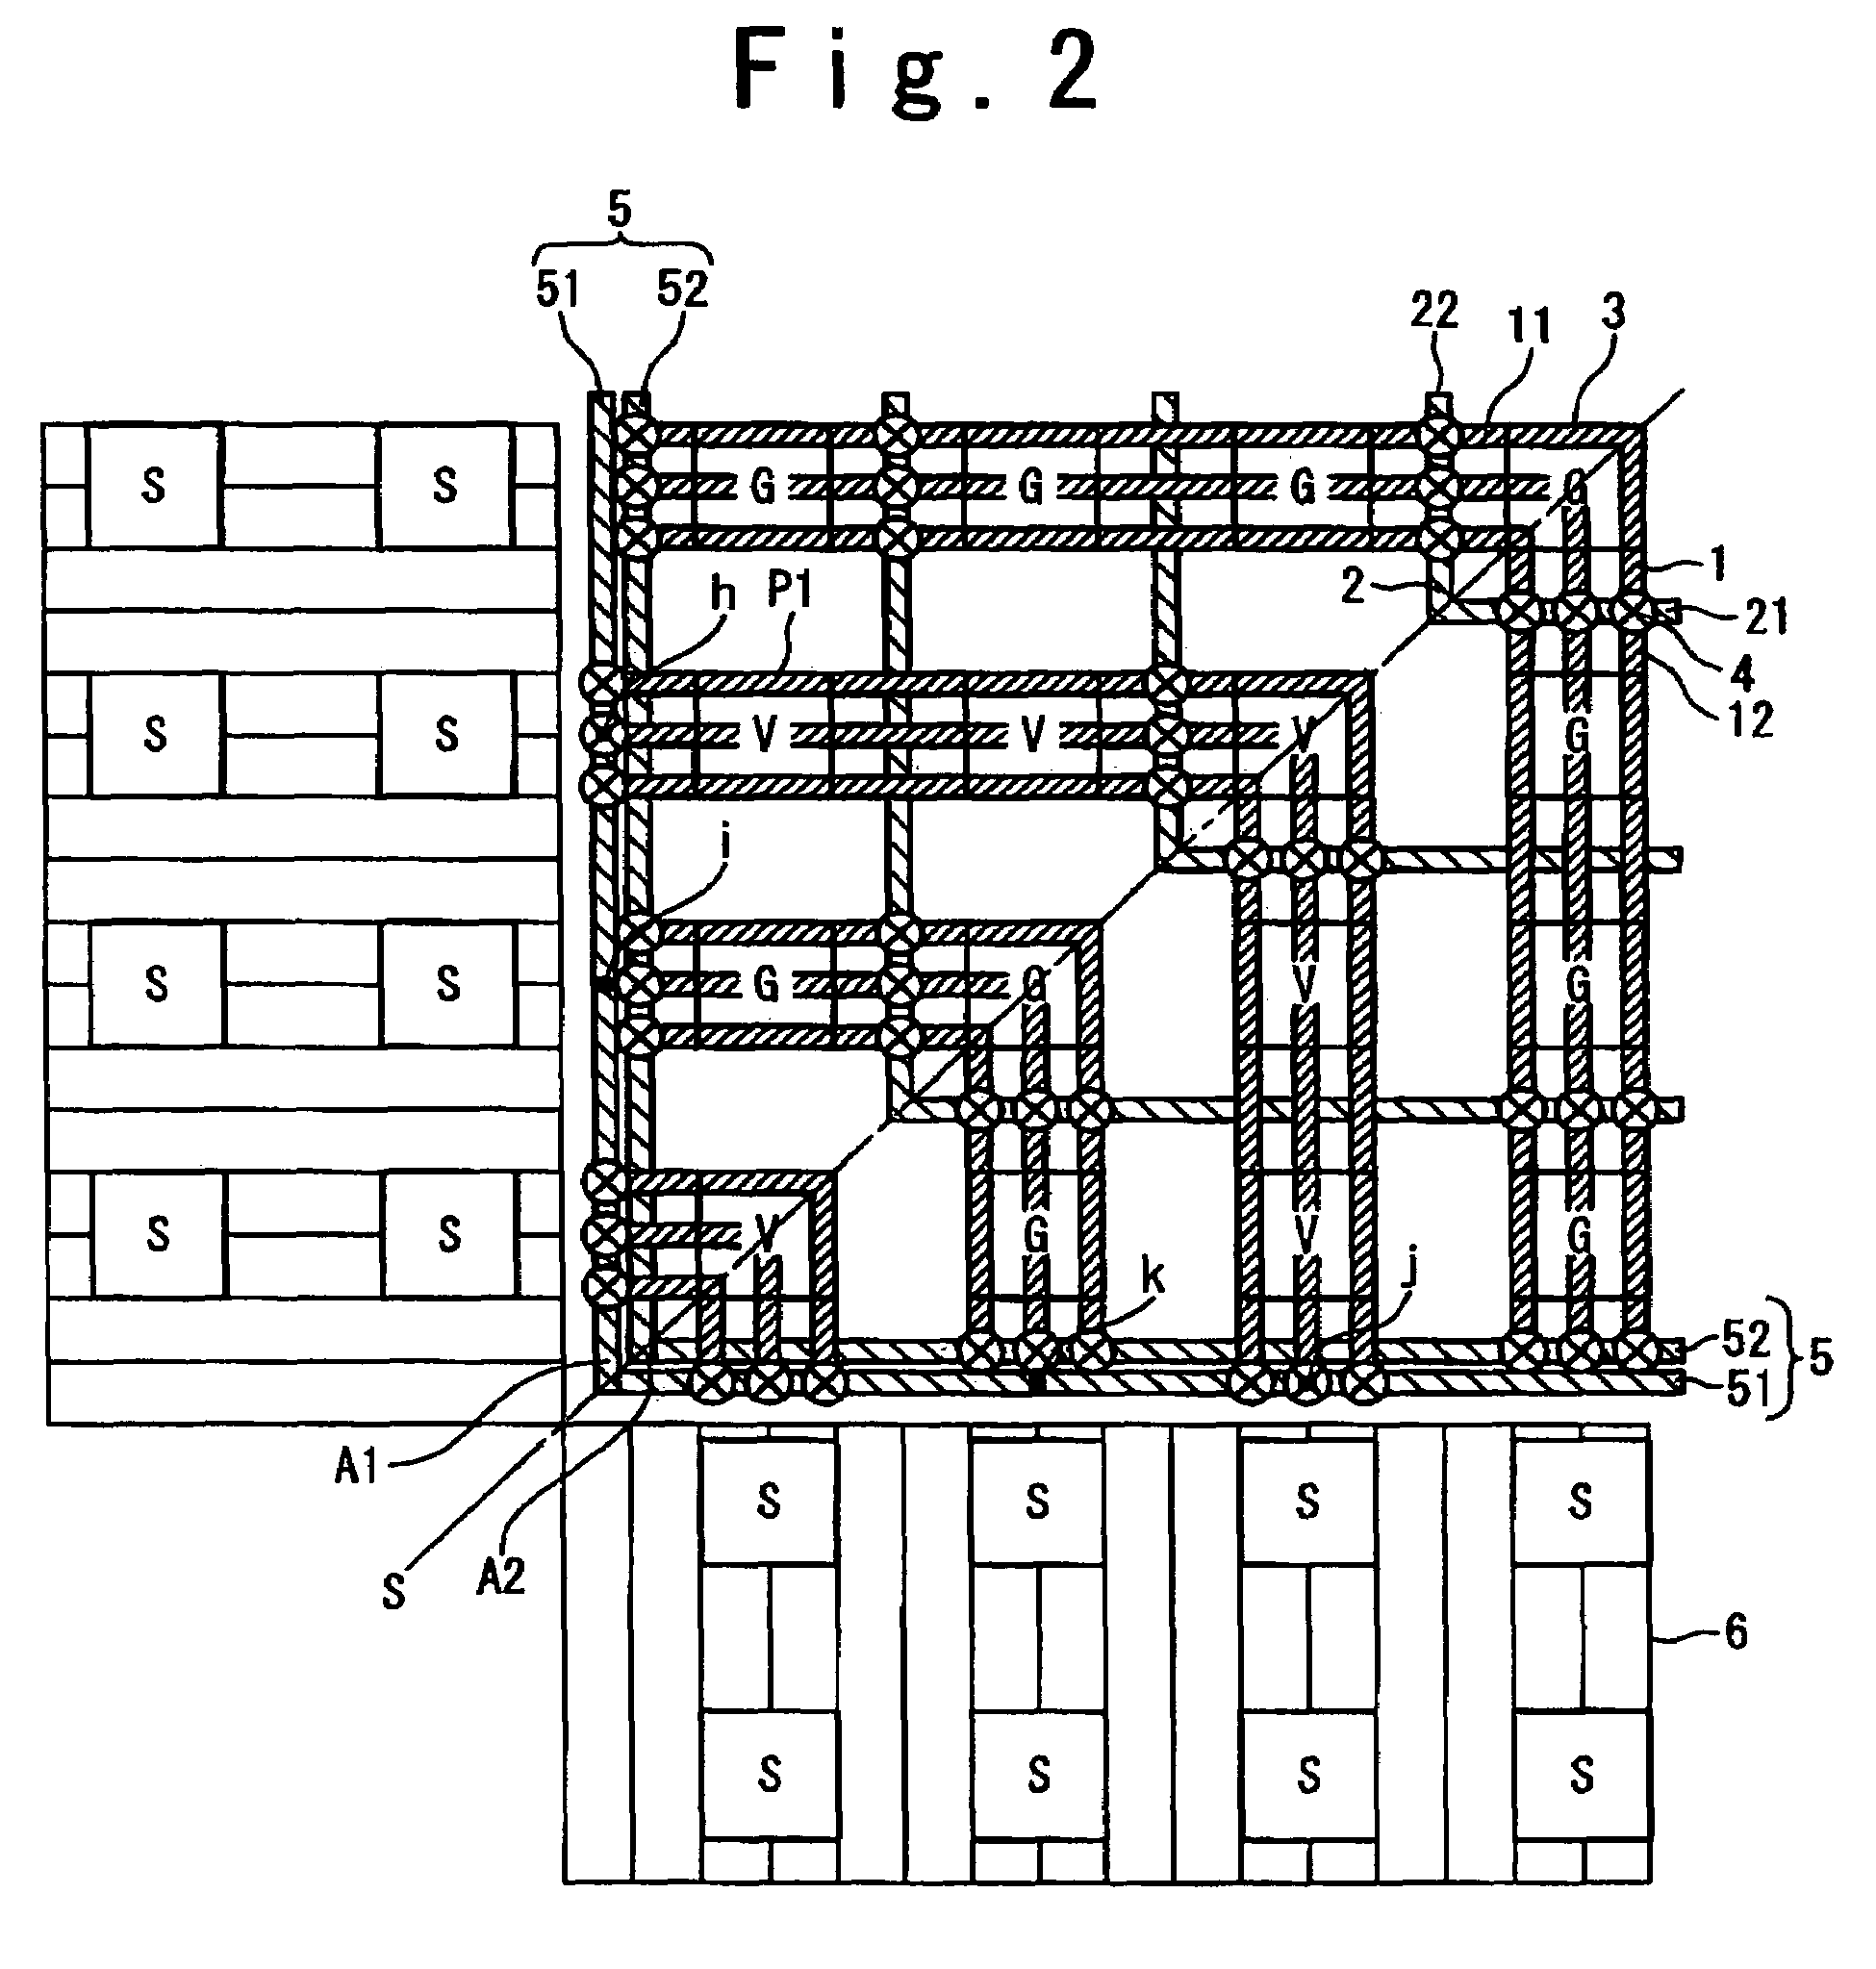 Flip-chip semiconductor device with improved power pad arrangement